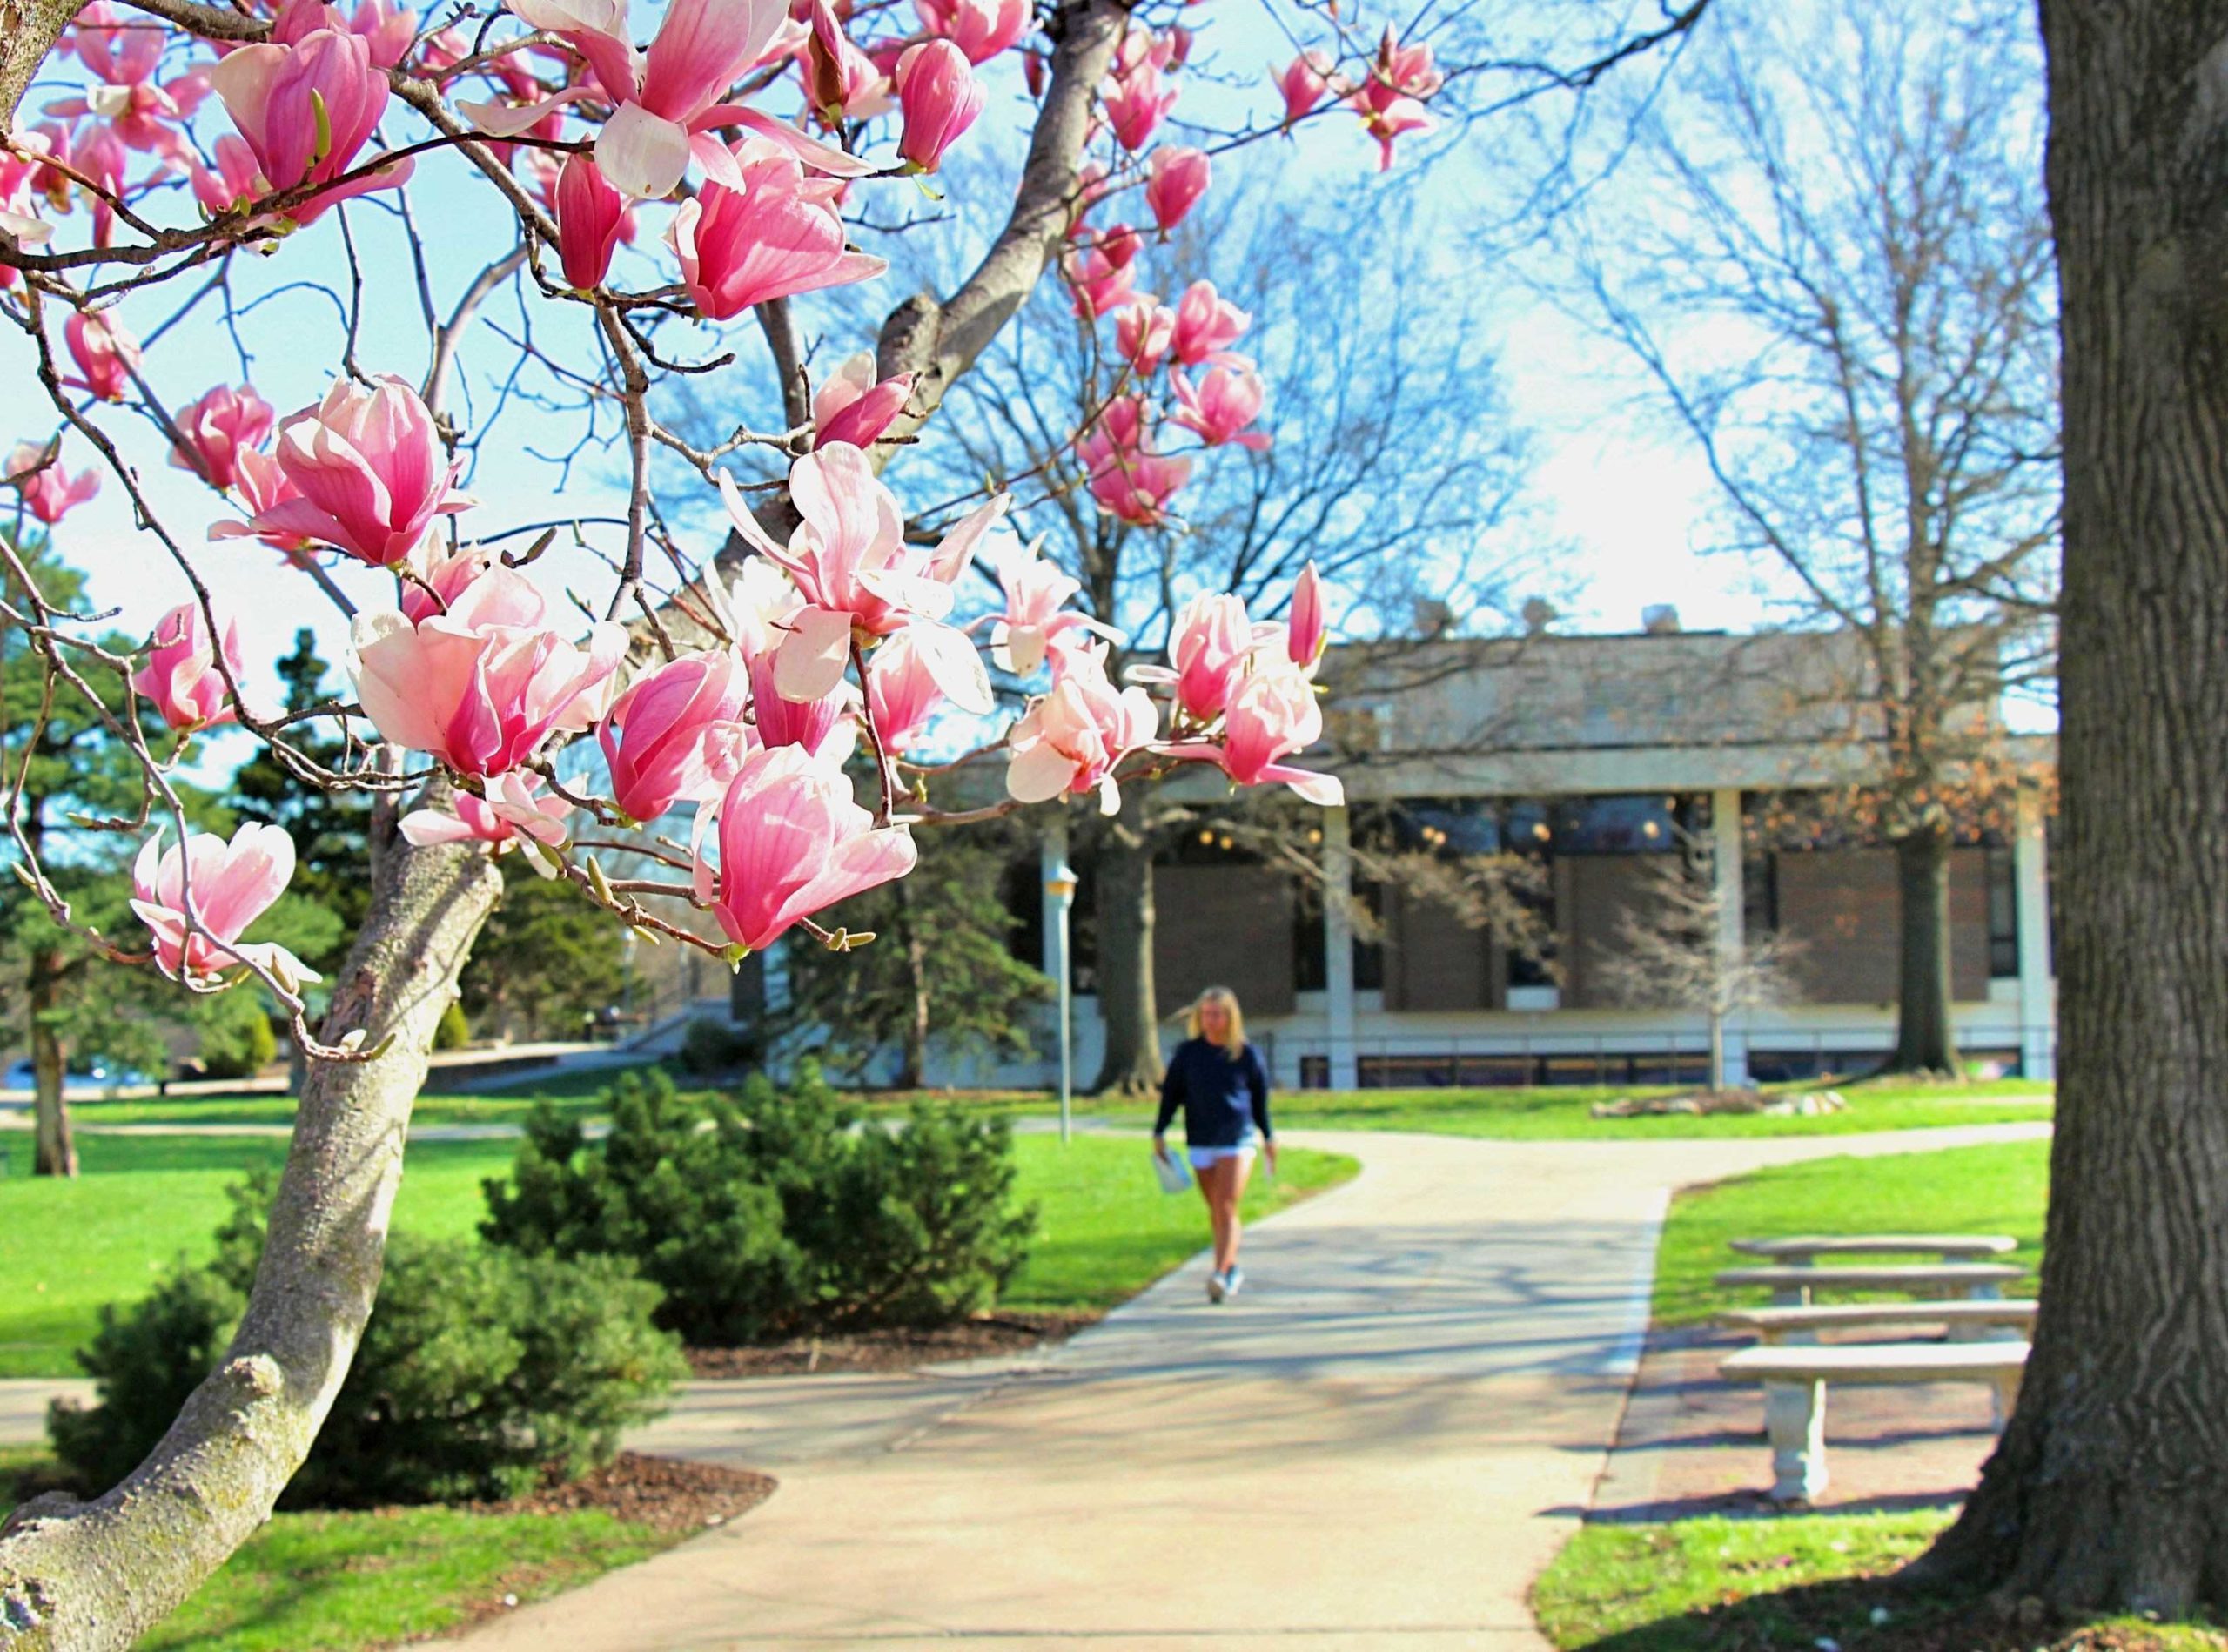 Student walking on campus framed by magnolia blooms